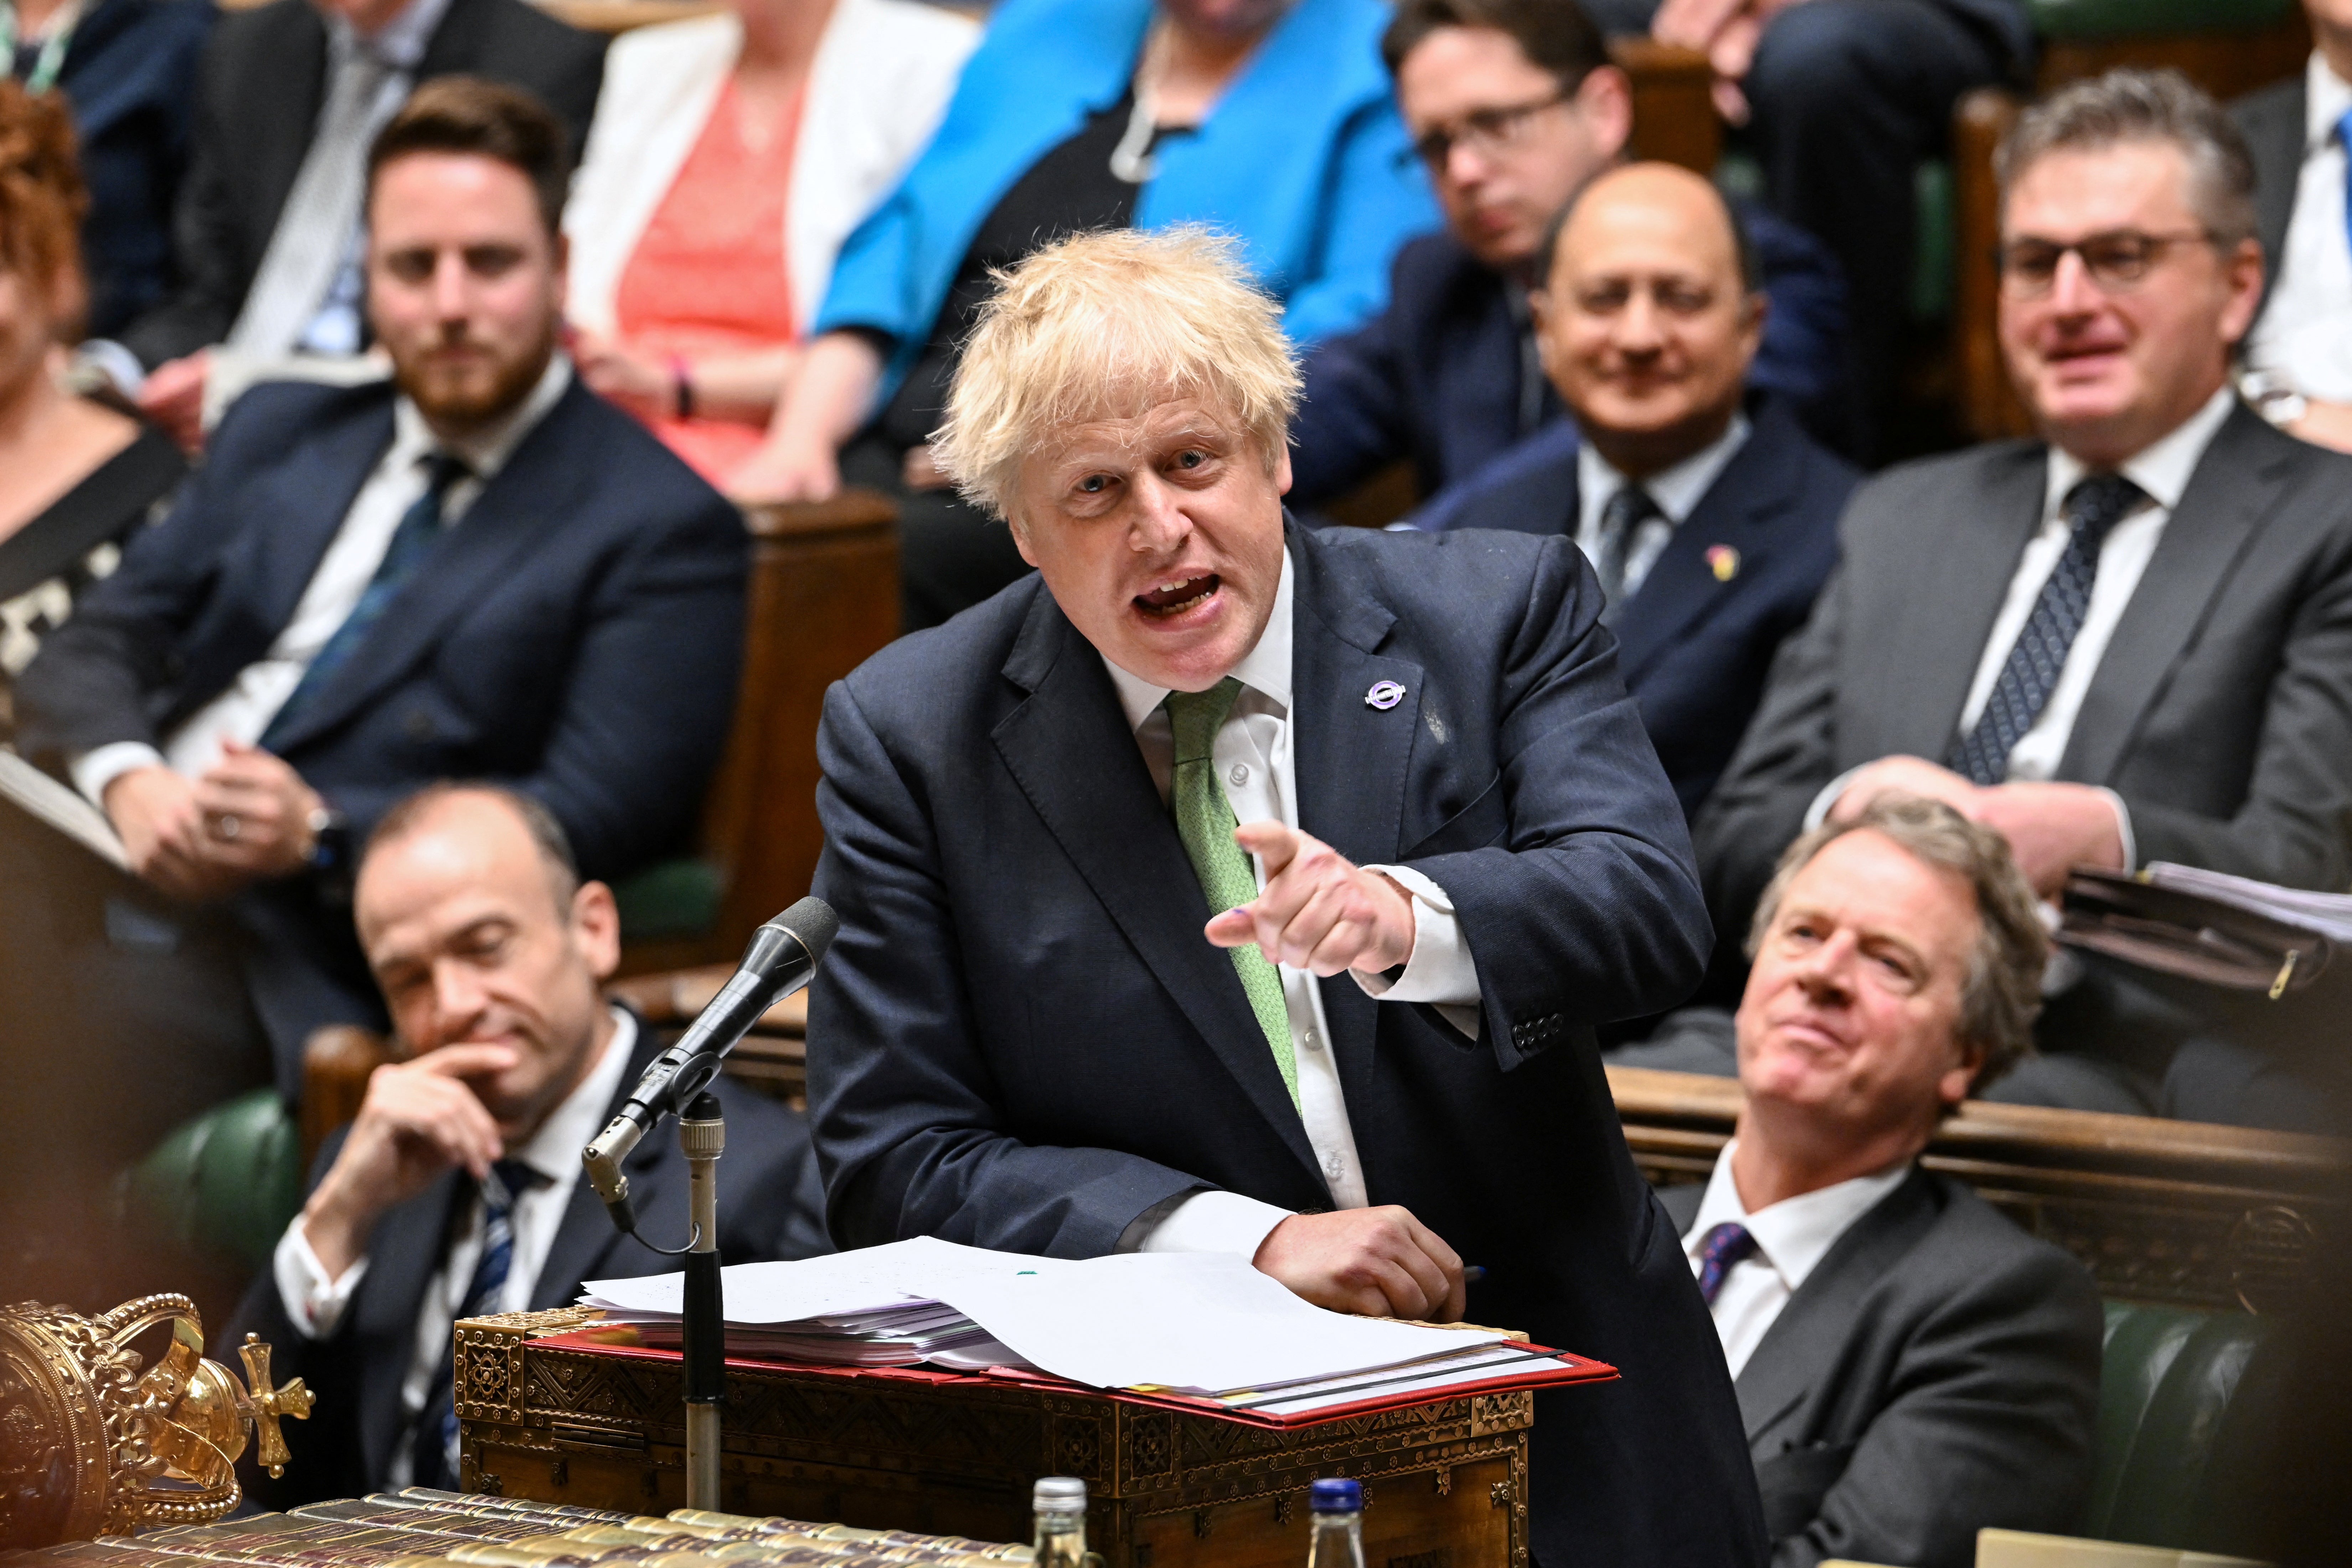 It would not take much to deprive Boris Johnson of his majority